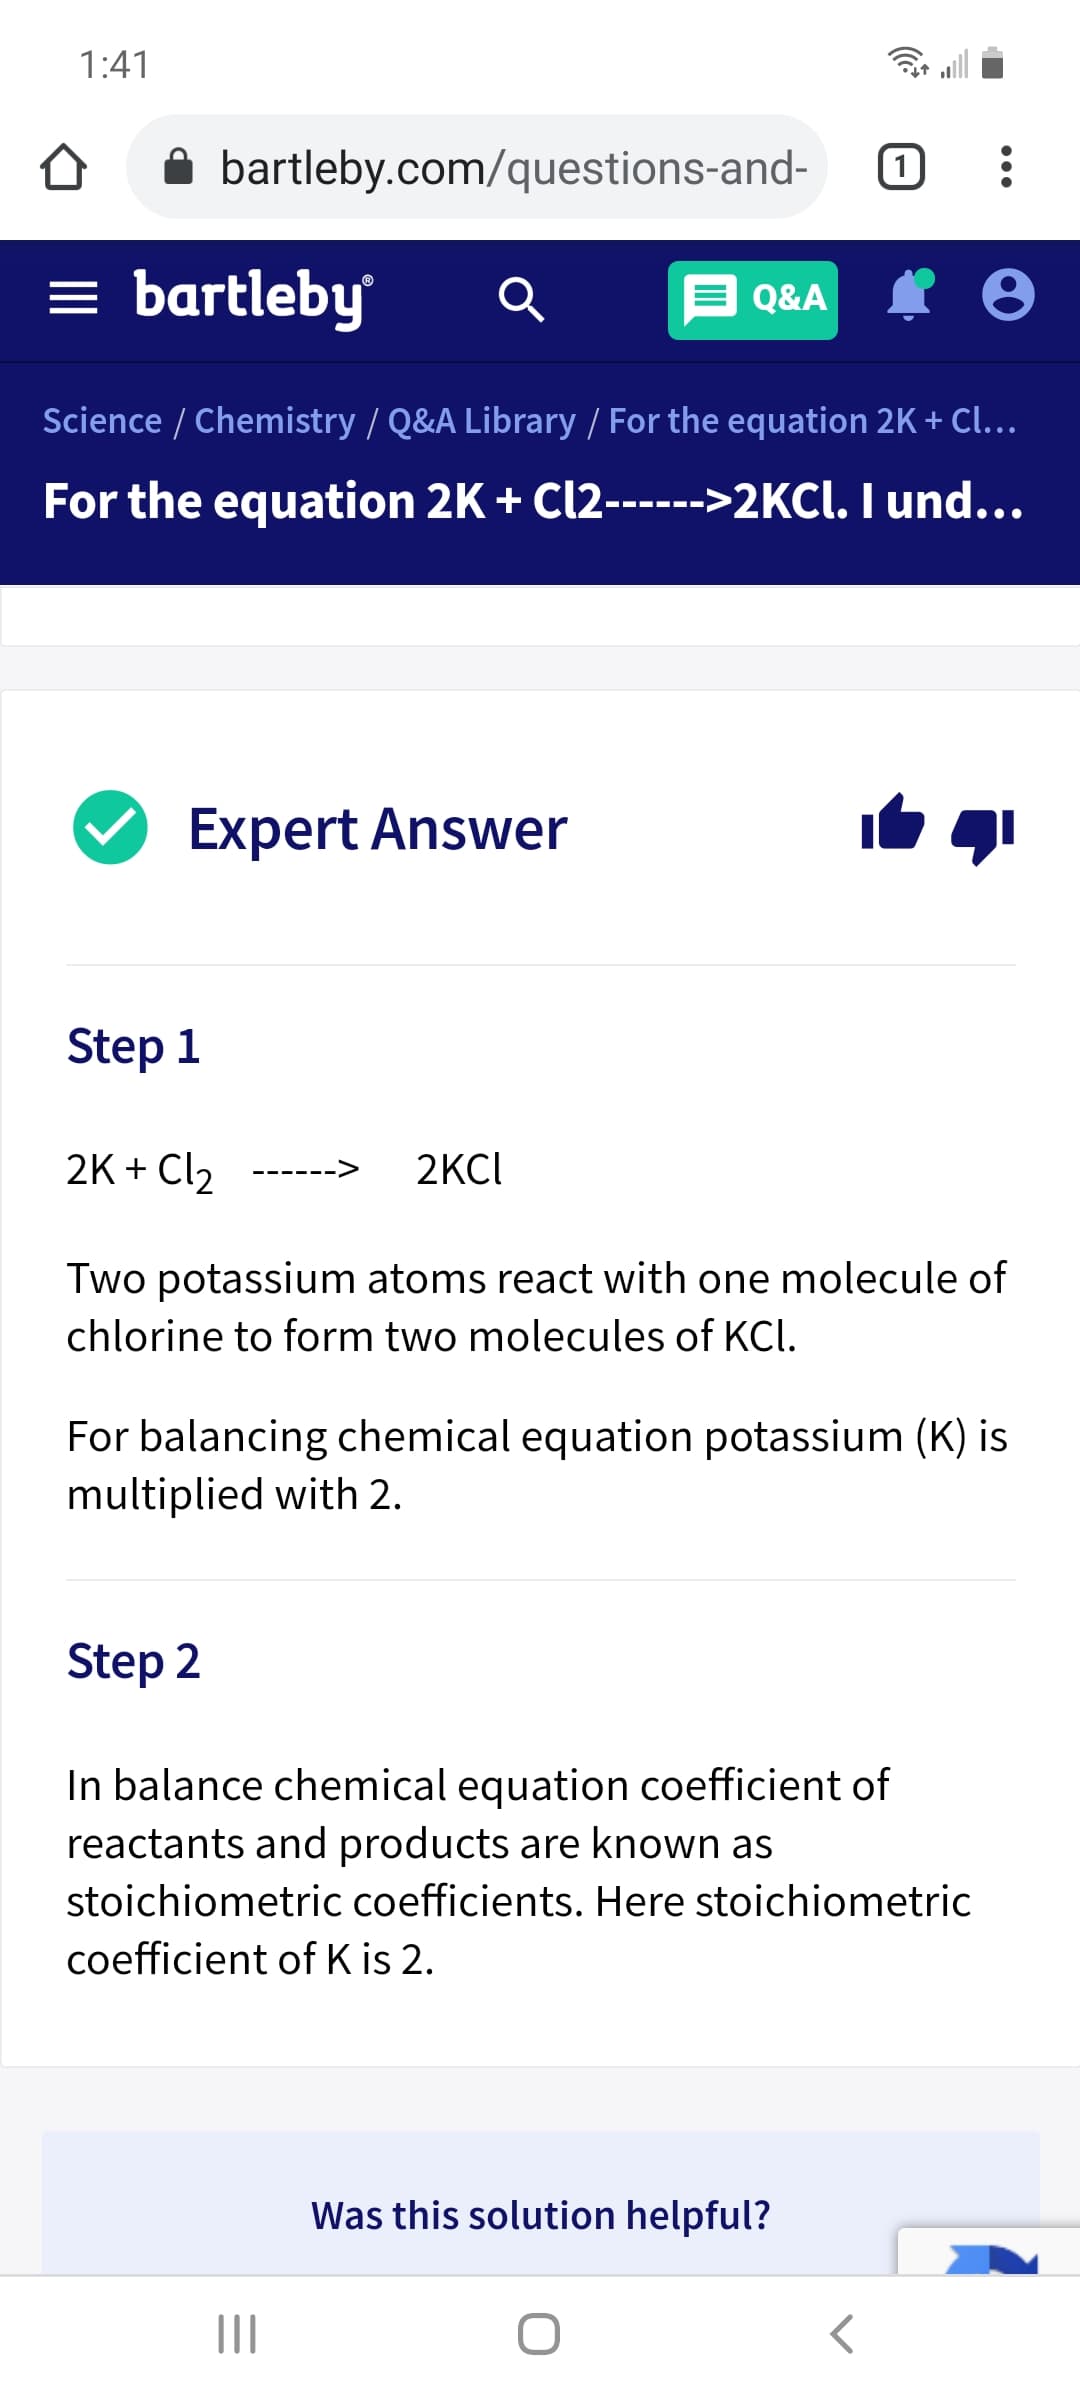 1:41
bartleby.com/questions-and-
= bartleby
Q&A
Science / Chemistry / Q&A Library / For the equation 2K + Cl...
For the equation 2K + Cl2------>2KCI. I und...
Expert Answer
Step 1
2K + Cl2
2KCI
Two potassium atoms react with one molecule of
chlorine to form two molecules of KCl.
For balancing chemical equation potassium (K) is
multiplied with 2.
Step 2
In balance chemical equation coefficient of
reactants and products are known as
stoichiometric coefficients. Here stoichiometric
coefficient of K is 2.
Was this solution helpful?
